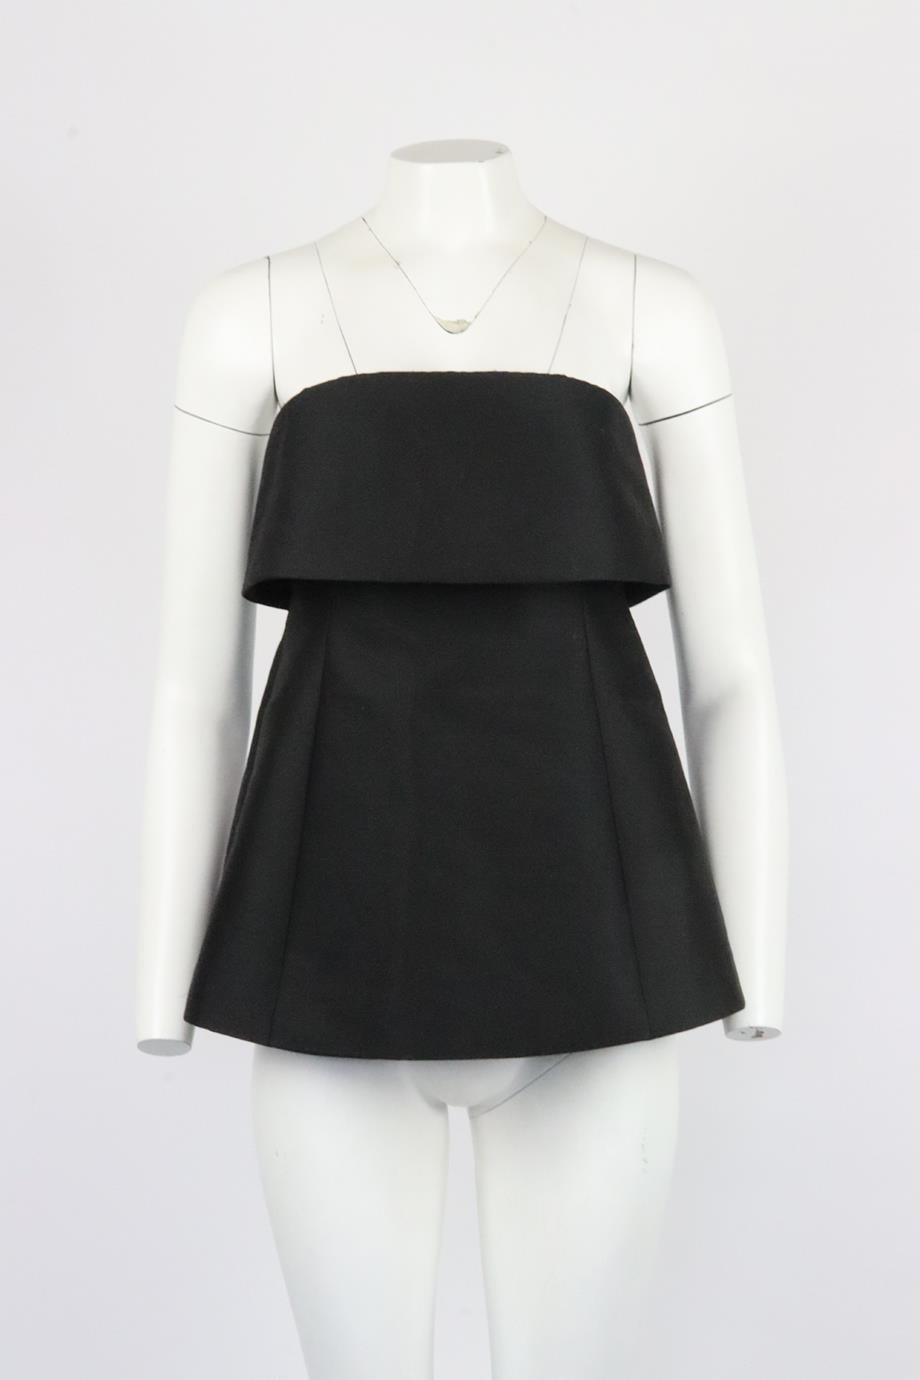 Toteme strapless wool and cotton blend top. Black. Sleeveless, strapless. Zip fastening at back. 45% Cotton, 43% wool, 12% polyamide. Size: DK 36 (UK 10, US 6, FR 38, IT 42). Bust: 28 in. Waist: 33.8 in. Hips: 42.8 in. Length: 18 in. New with tags